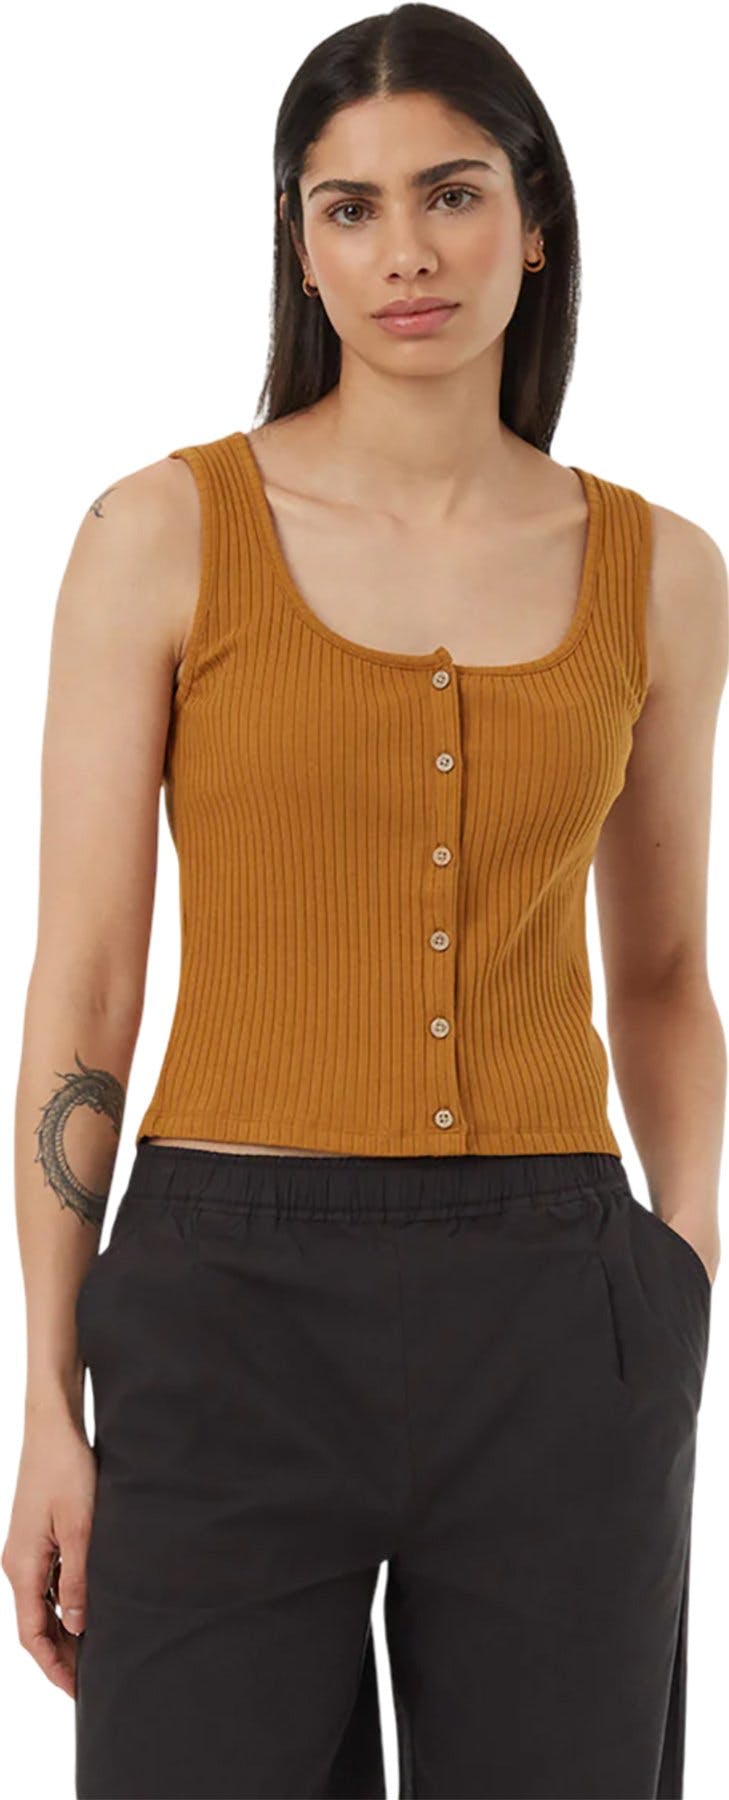 Product image for Rib Button Front Tank Top - Women's